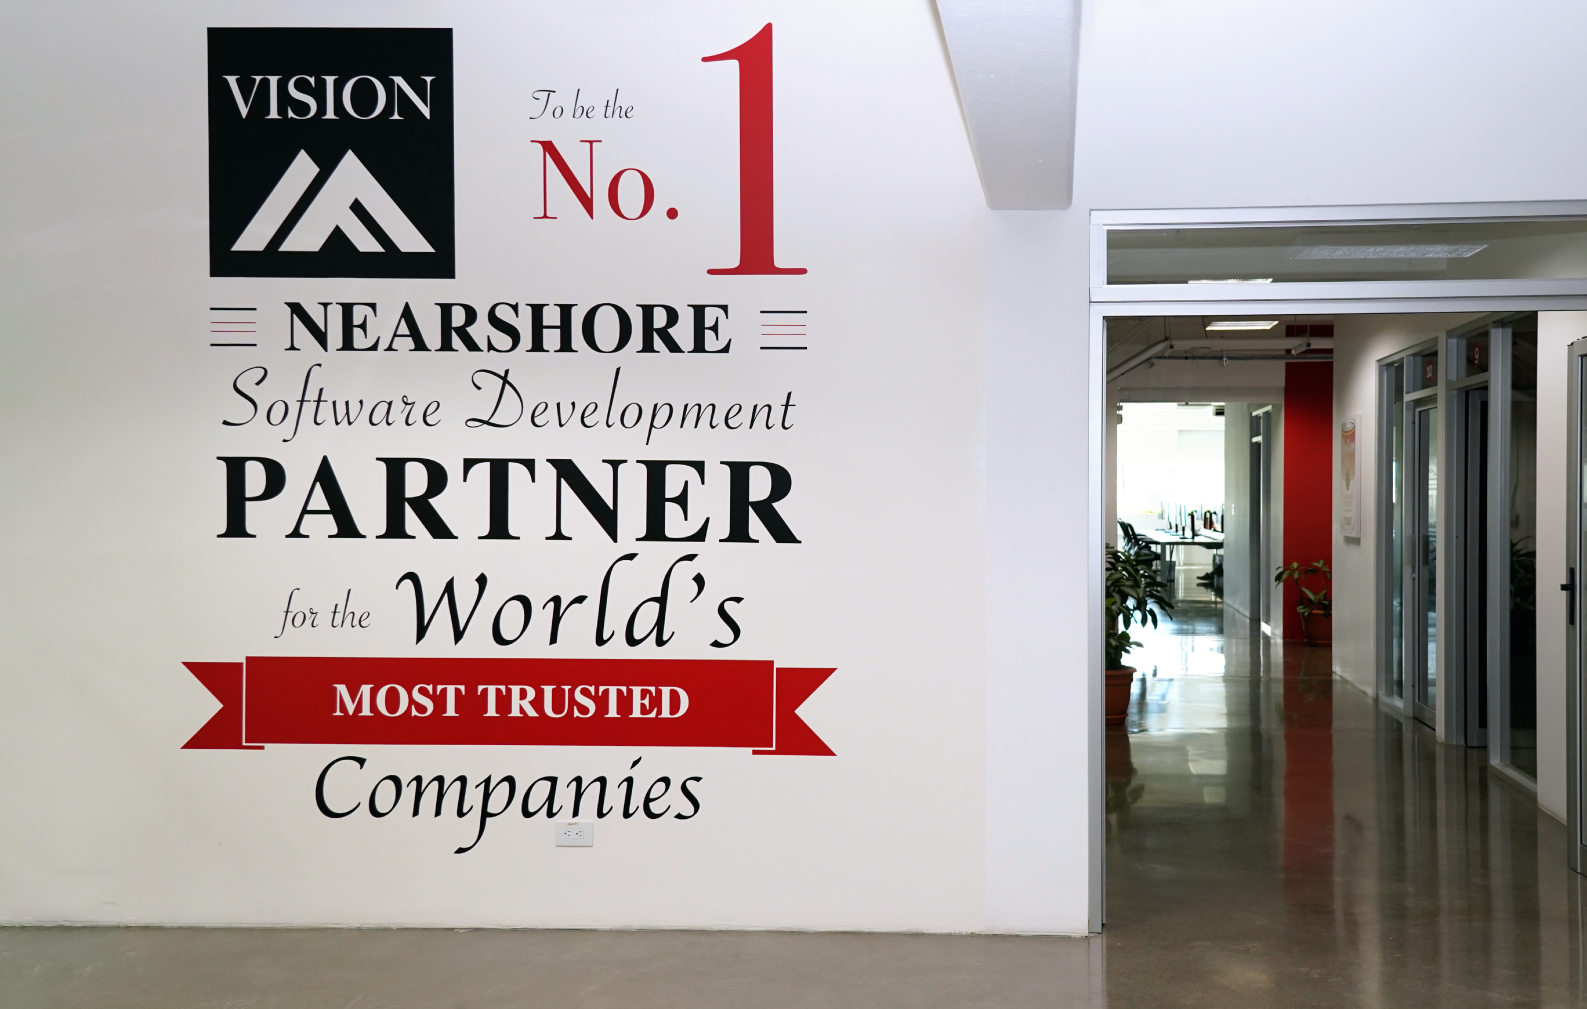 A mural on a wall at the office says ‘To be the No.1 nearshore Software Development partner for the world's most trusted companies'